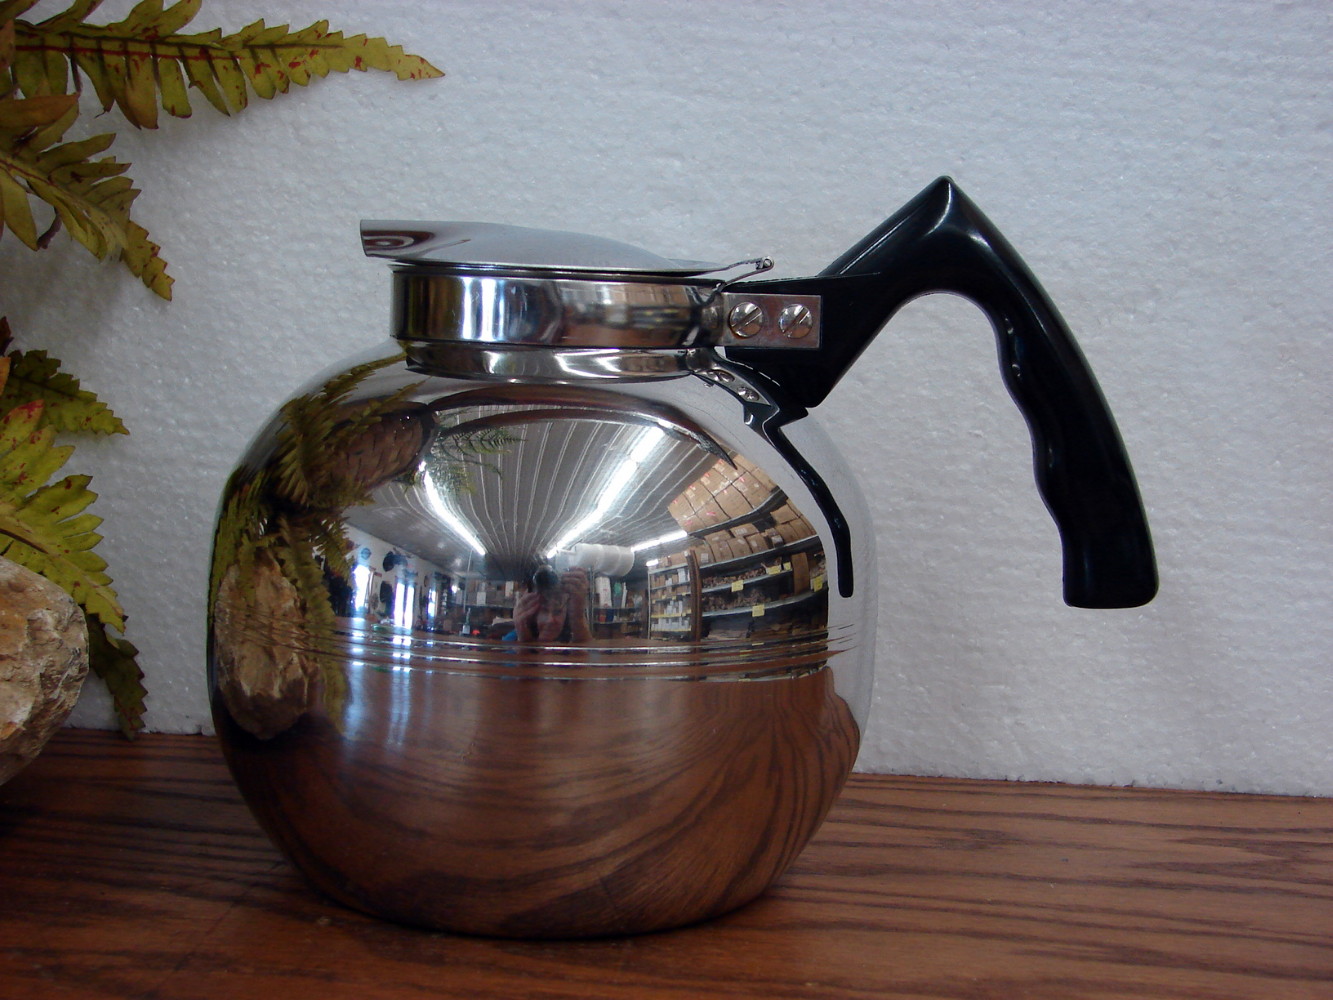 Vintage Retro Round Ball GE Chrome Electric Kettle Water Heater